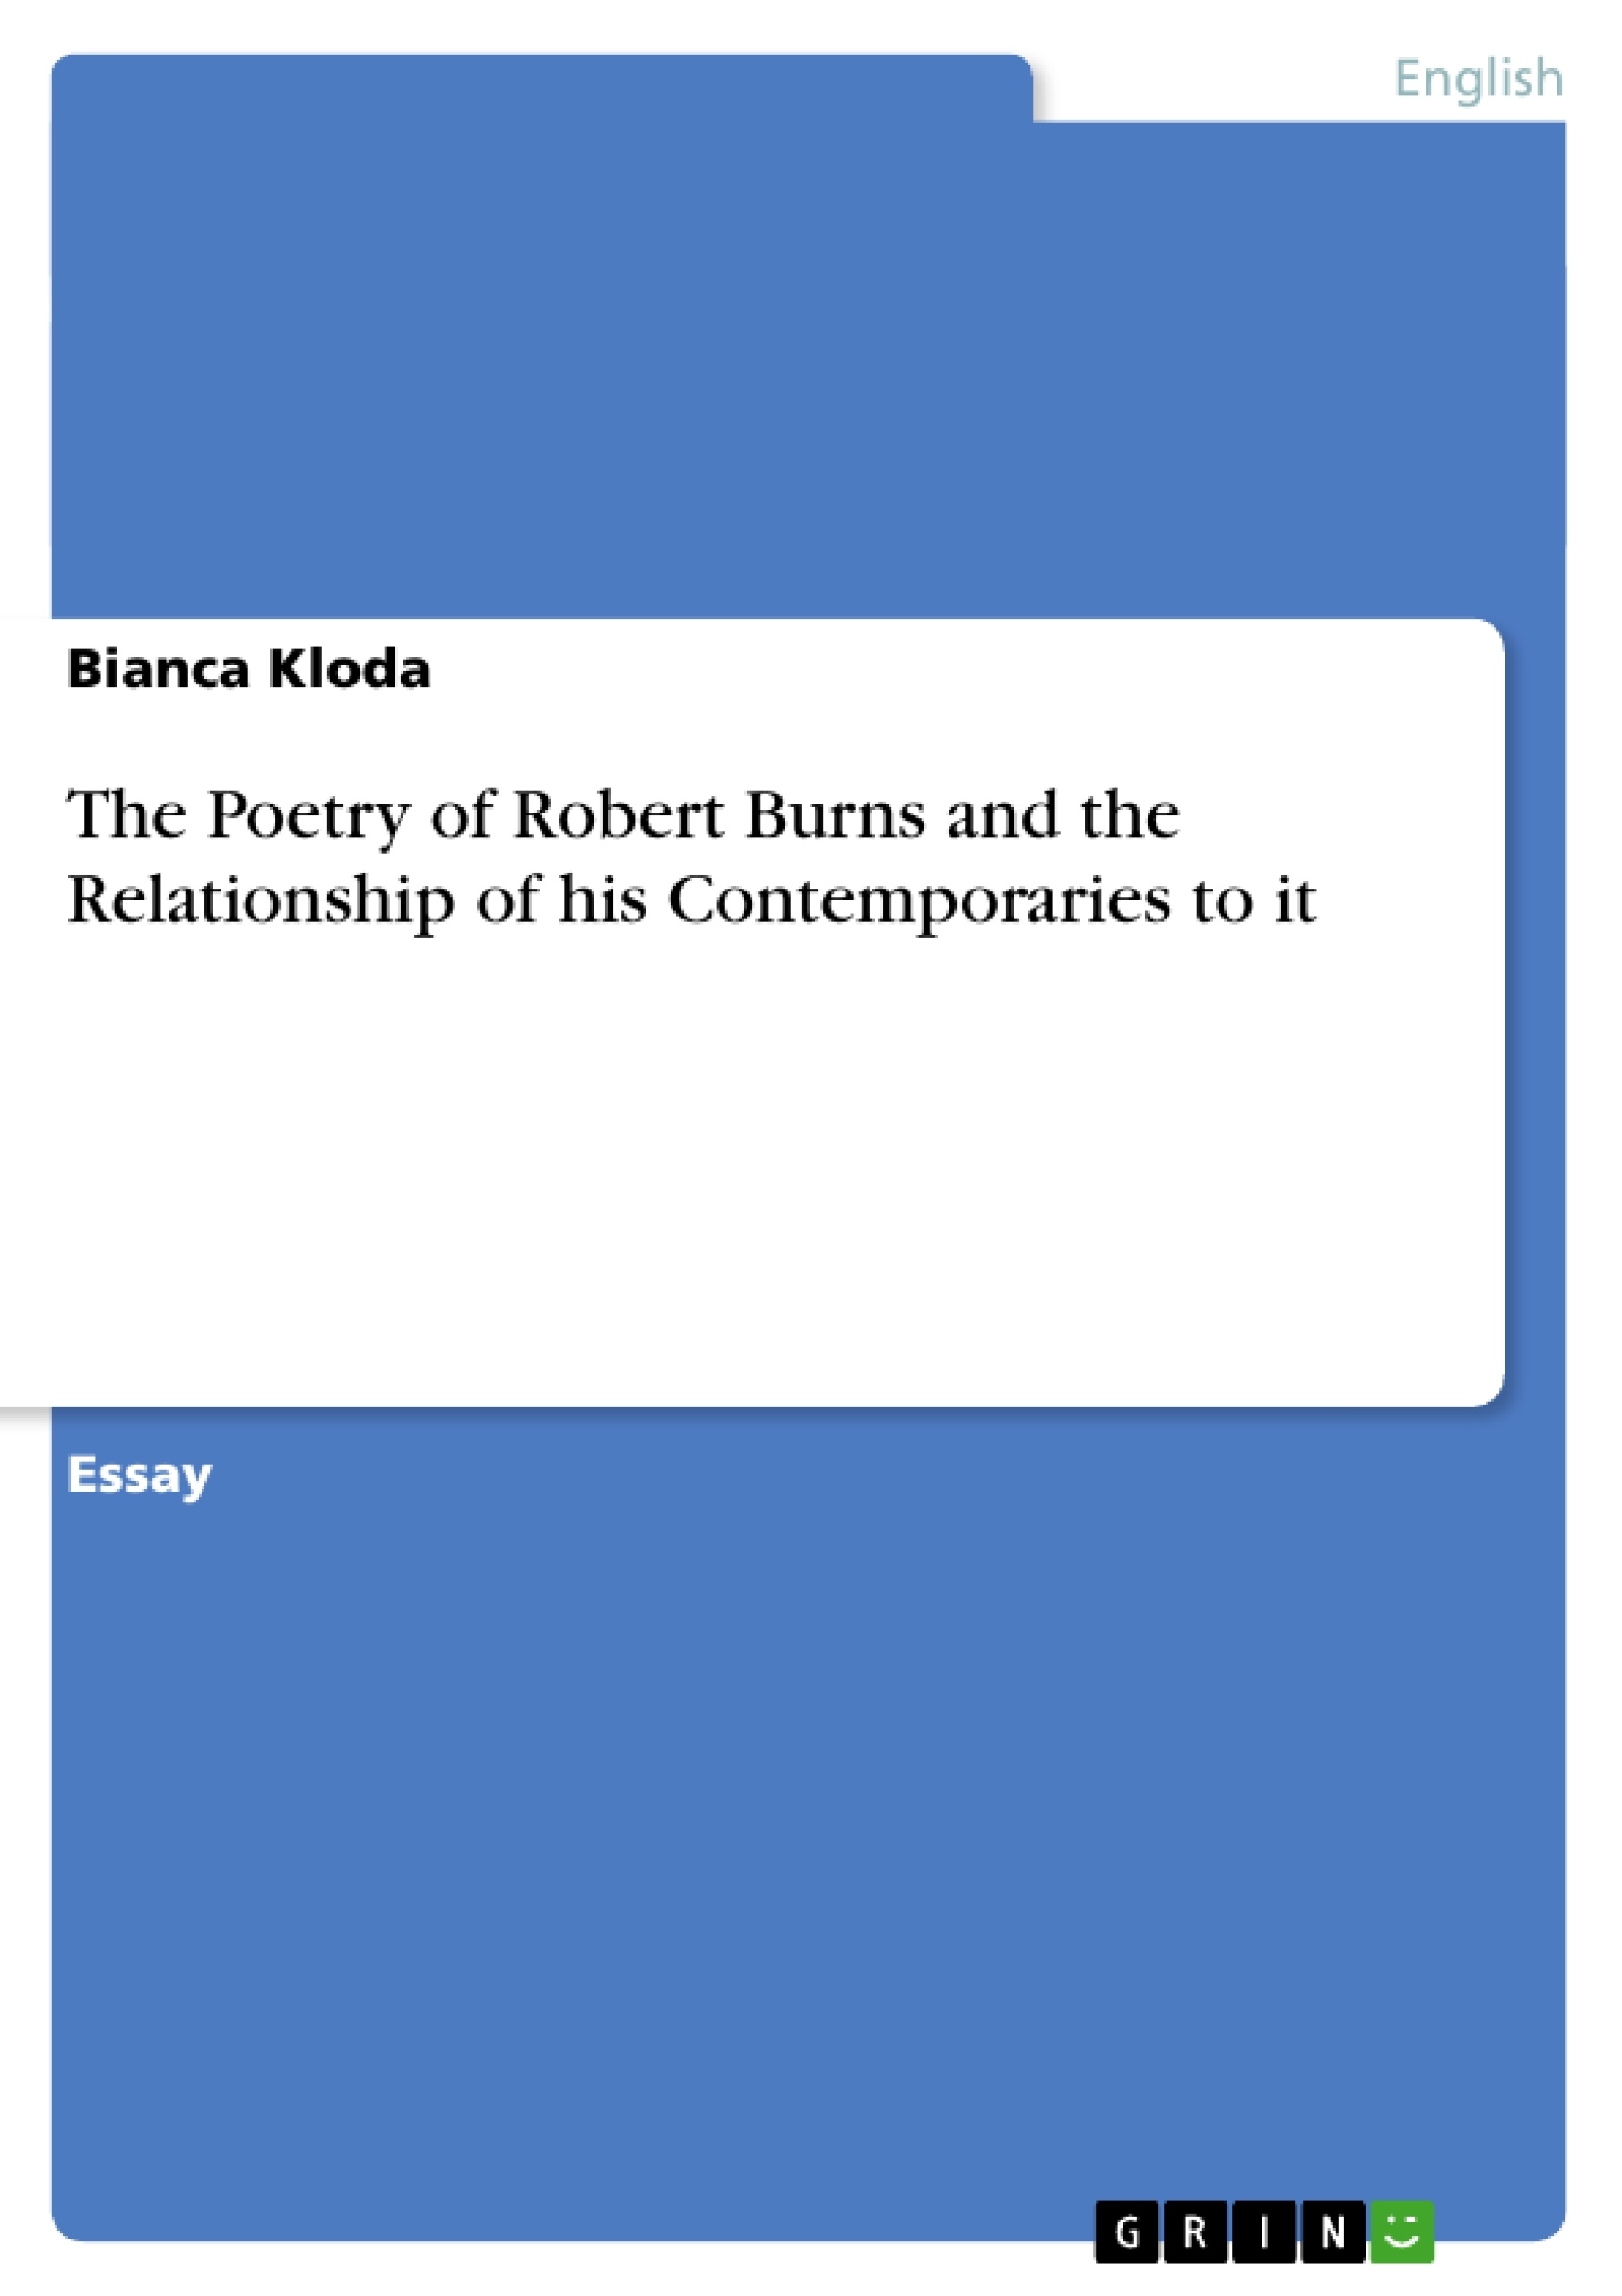 Title: The Poetry of Robert Burns and the Relationship of his Contemporaries to it